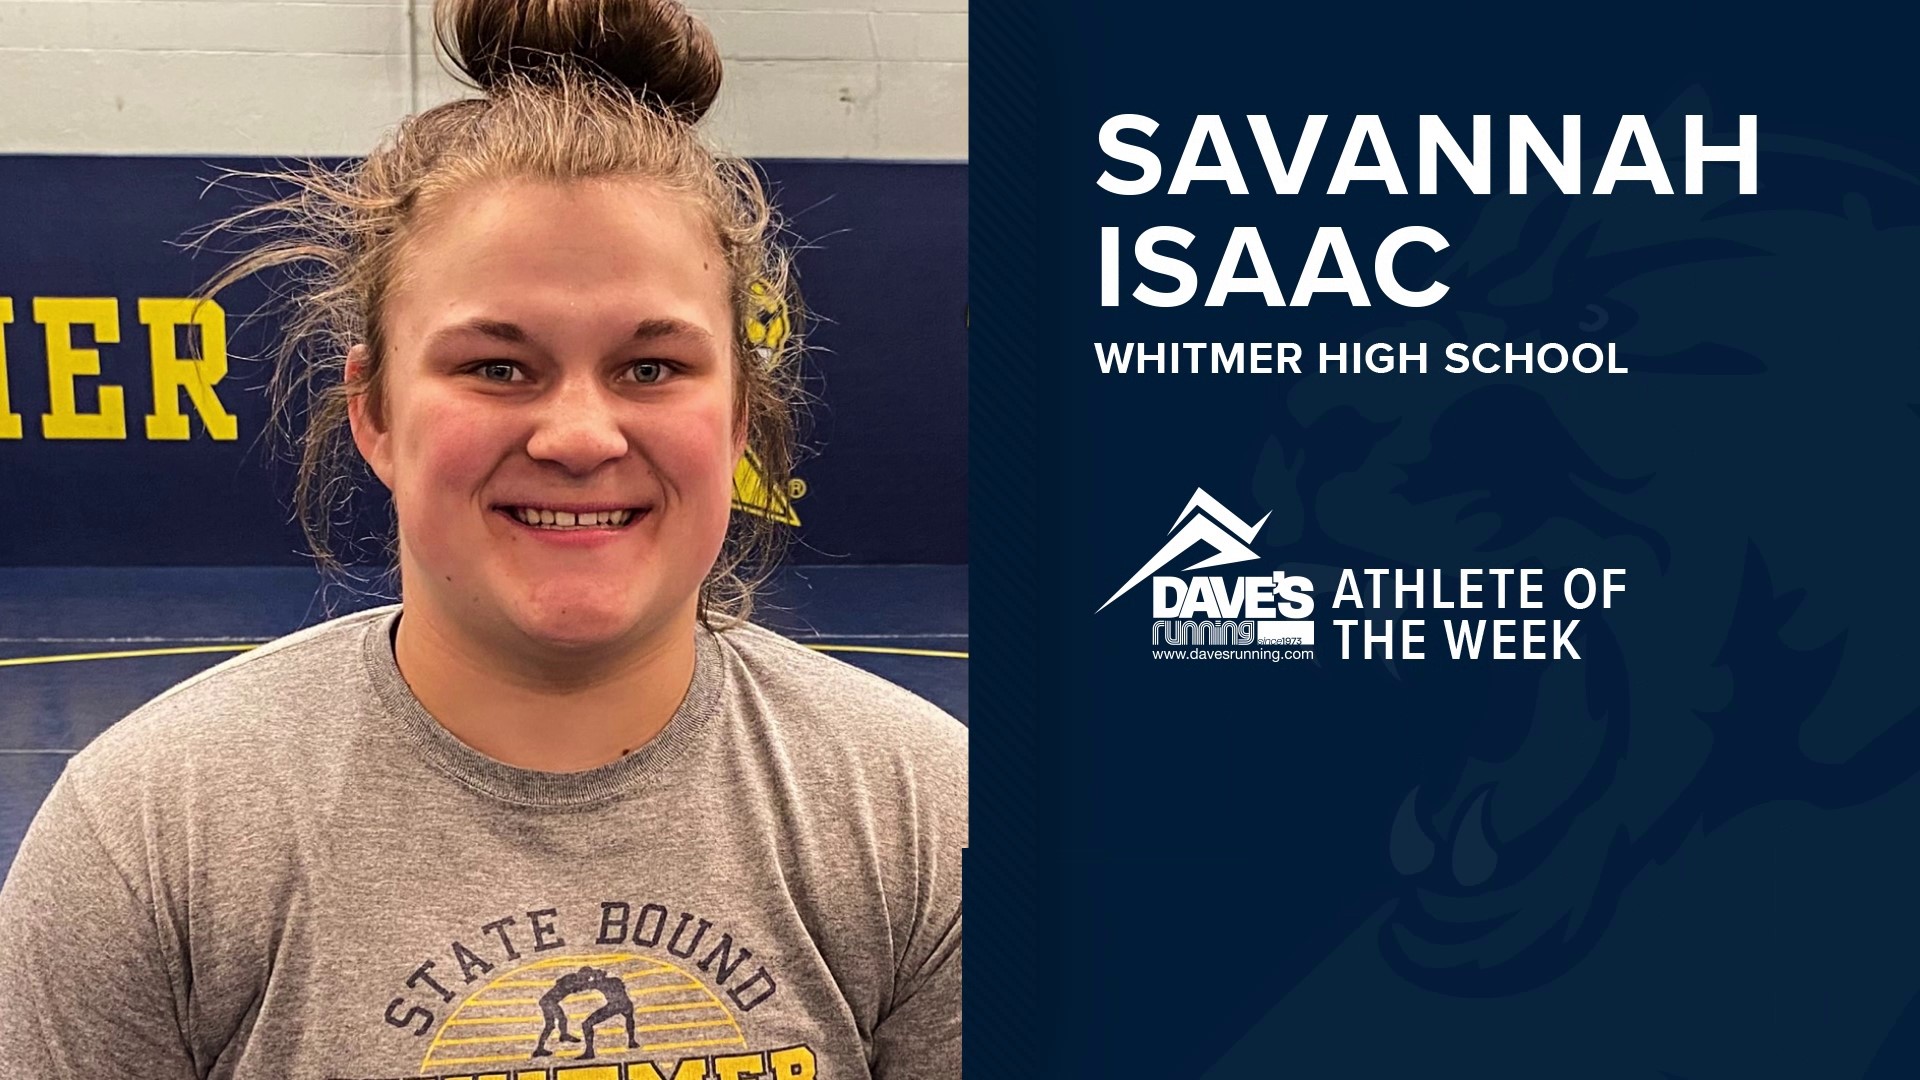 Two weeks after capturing the inaugural OHSAA Wrestling State Championship at 190 pounds, Savannah Isaac has earned WTOL 11's Athlete of the Week honors.